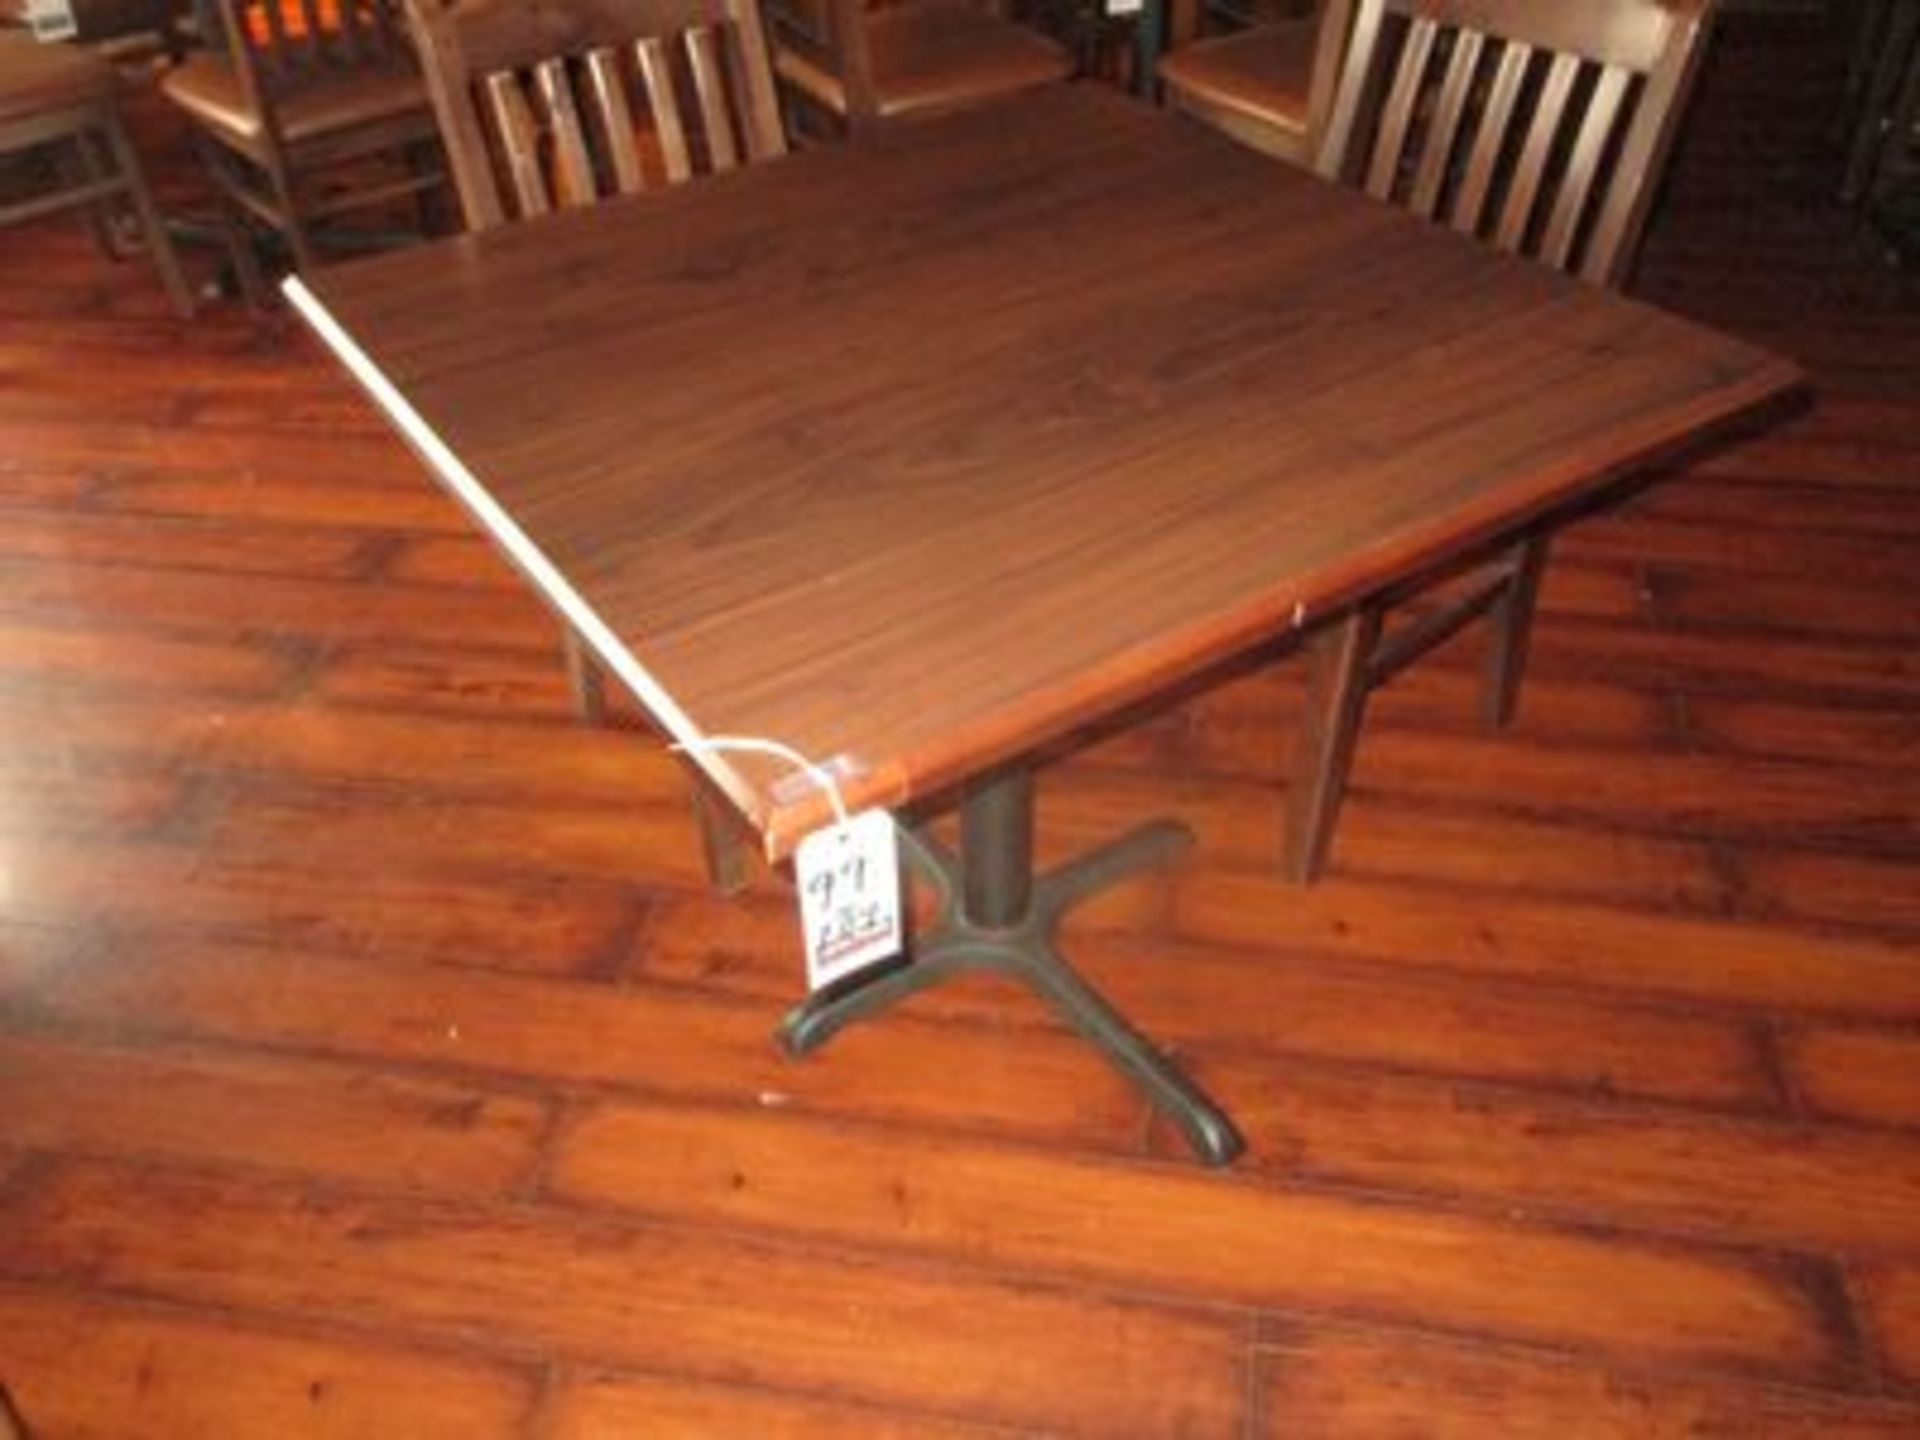 36"X36" S.P. FORMICA TOP TABLE